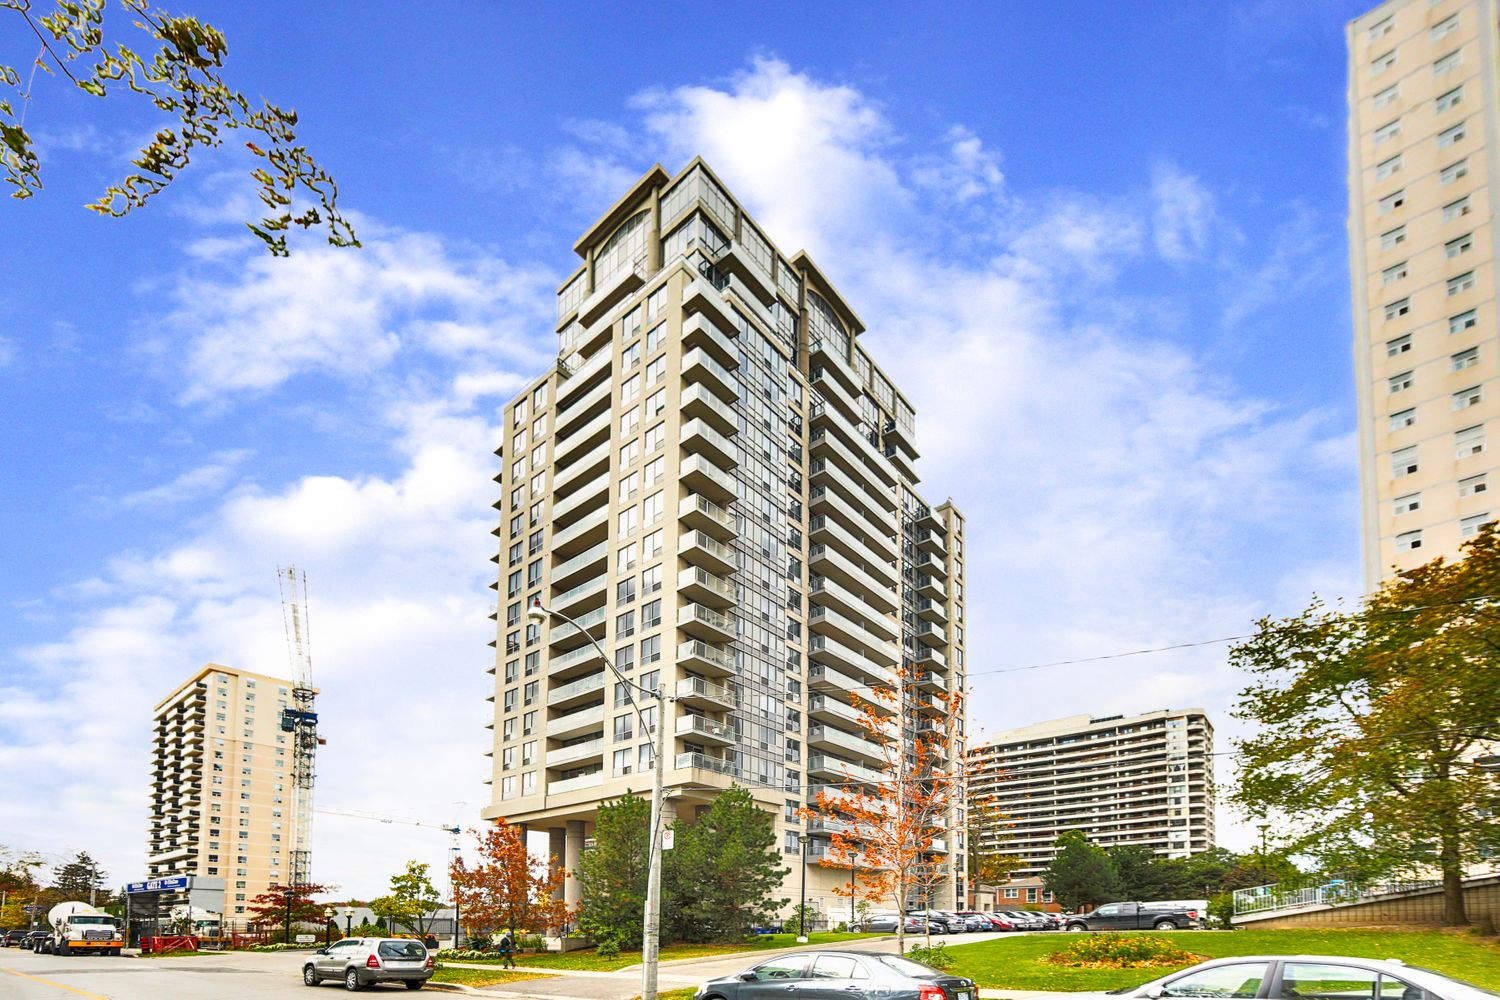 70 High Park Avenue. High Park Condominiums is located in  West End, Toronto - image #1 of 4